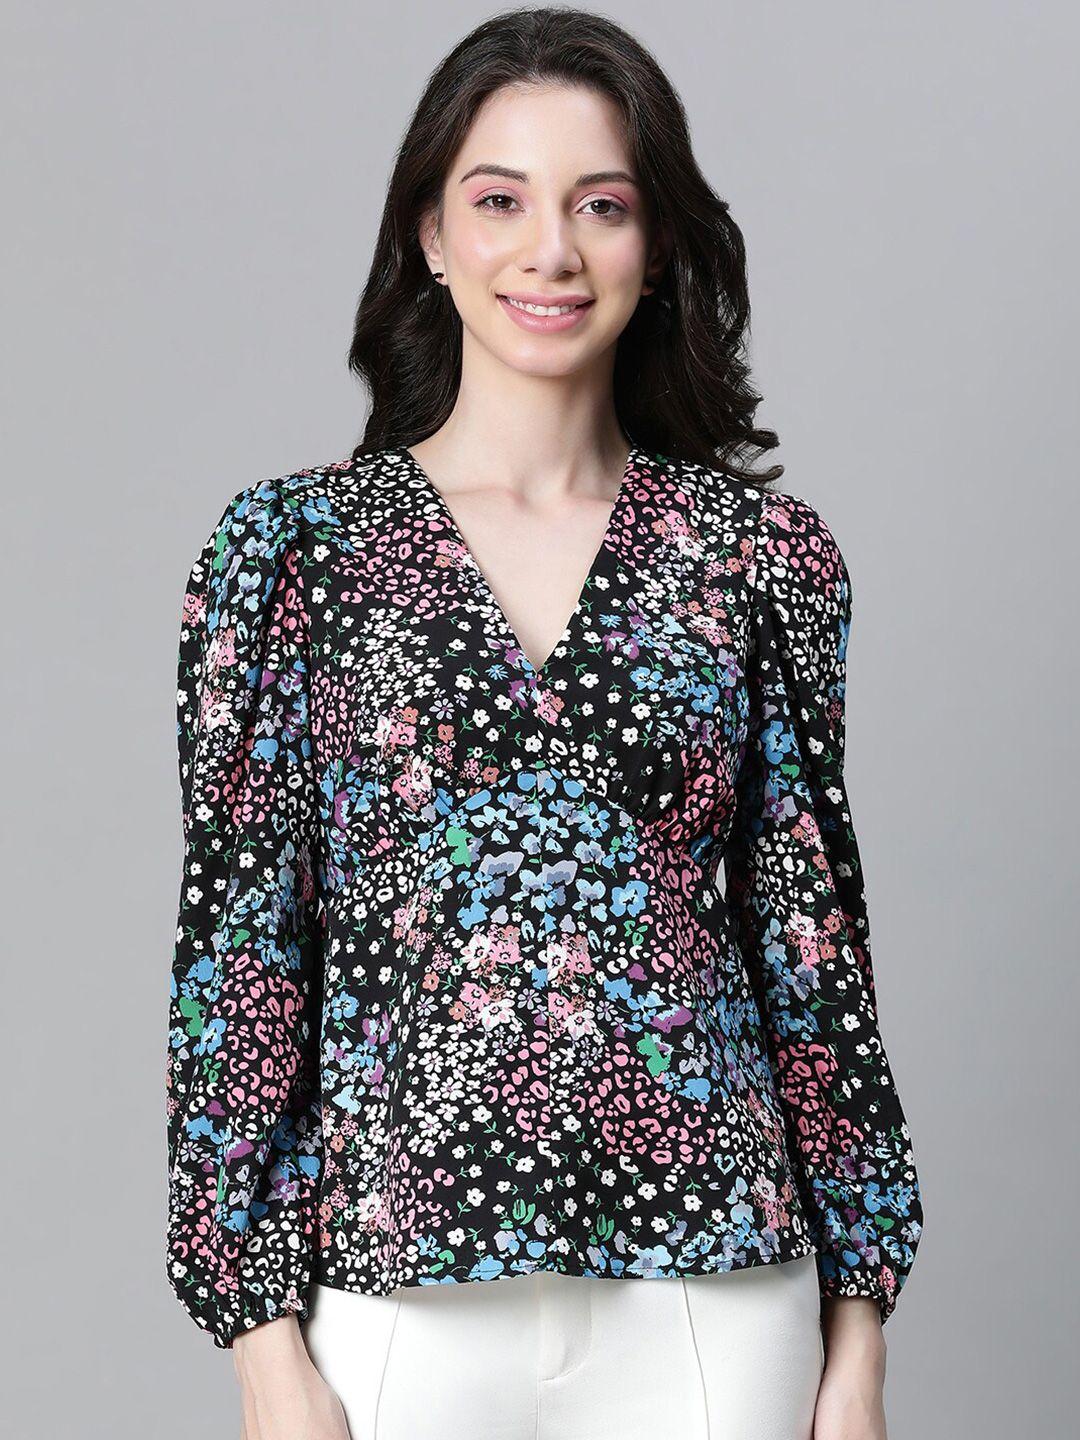 oxolloxo-floral-print-puff-sleeves-crepe-blouson-top